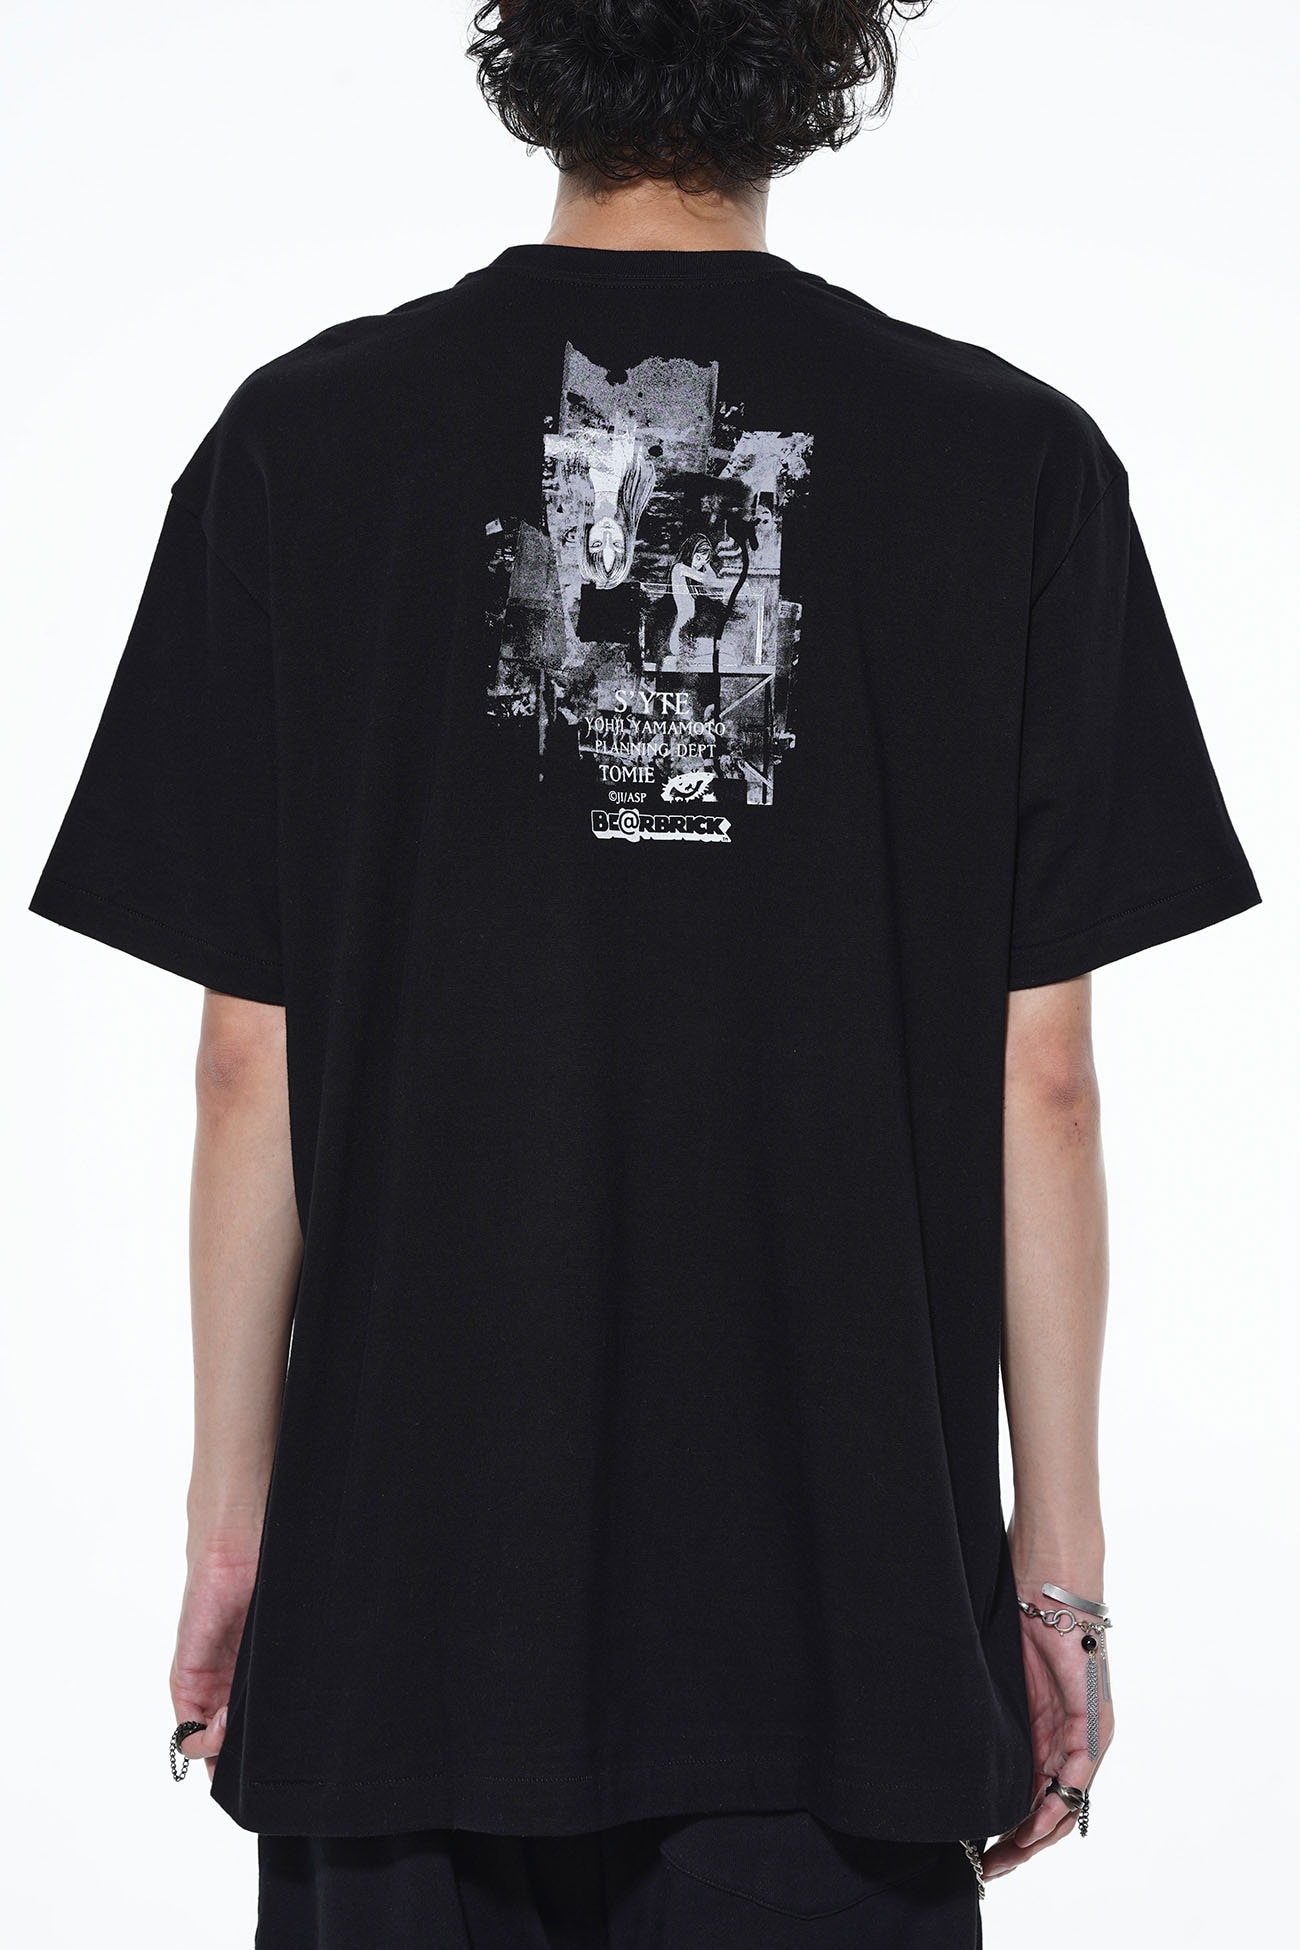 BE@RBRICK × Junji ITO "Tomie" Masterpiece Collection Cover T-shirt